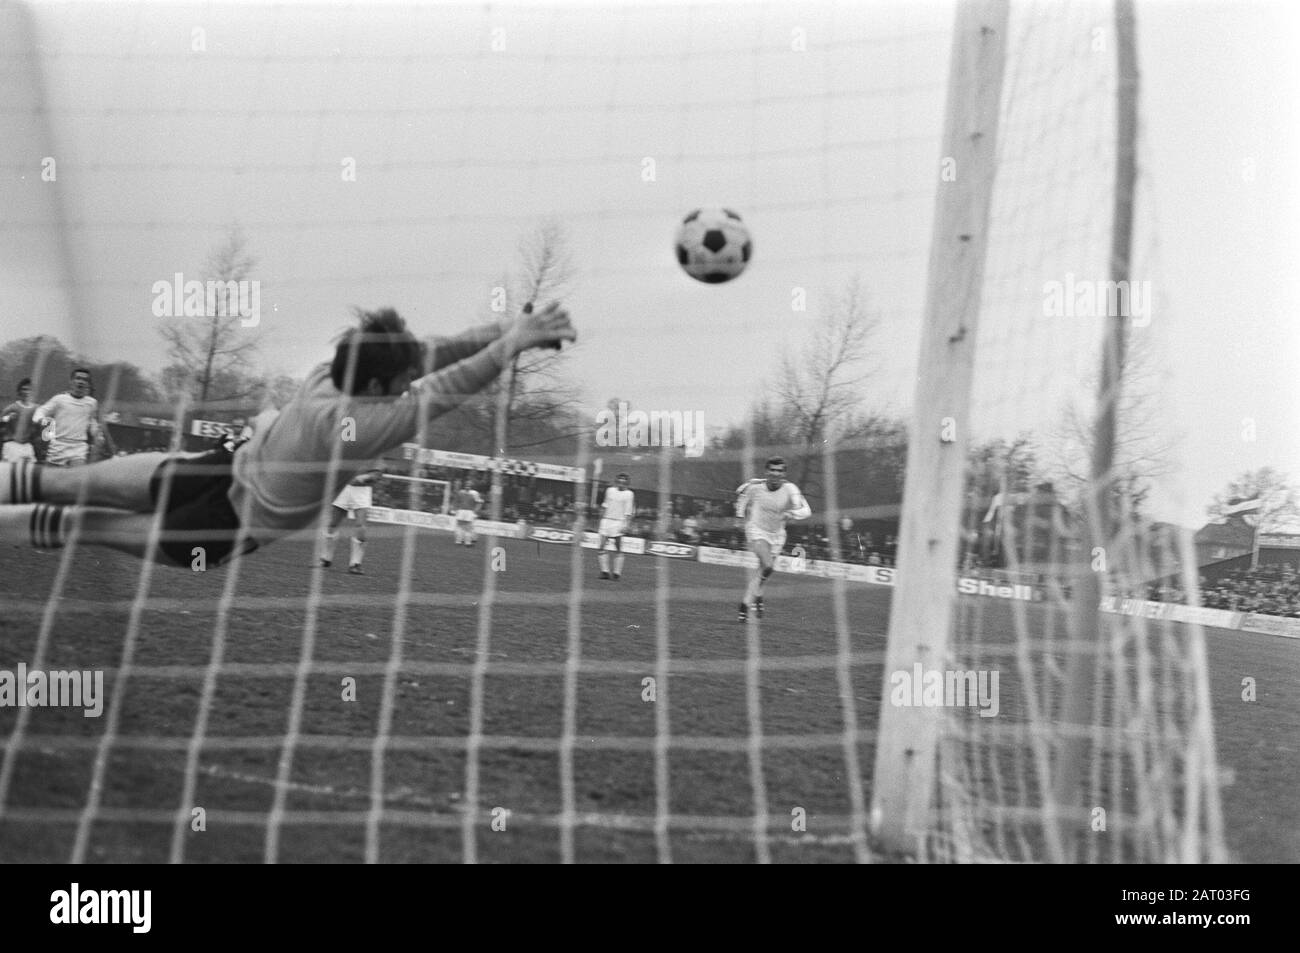 Football match for the quarterfinals of the KNVB cup RCH - Sparta: 1-4  Goal of Sparta Date: 7 April 1971 Location: Heemstede, Noord-Holland Keywords: goals, goalkeepers, players, sport, football Institution name: KNVB, Sparta Stock Photo